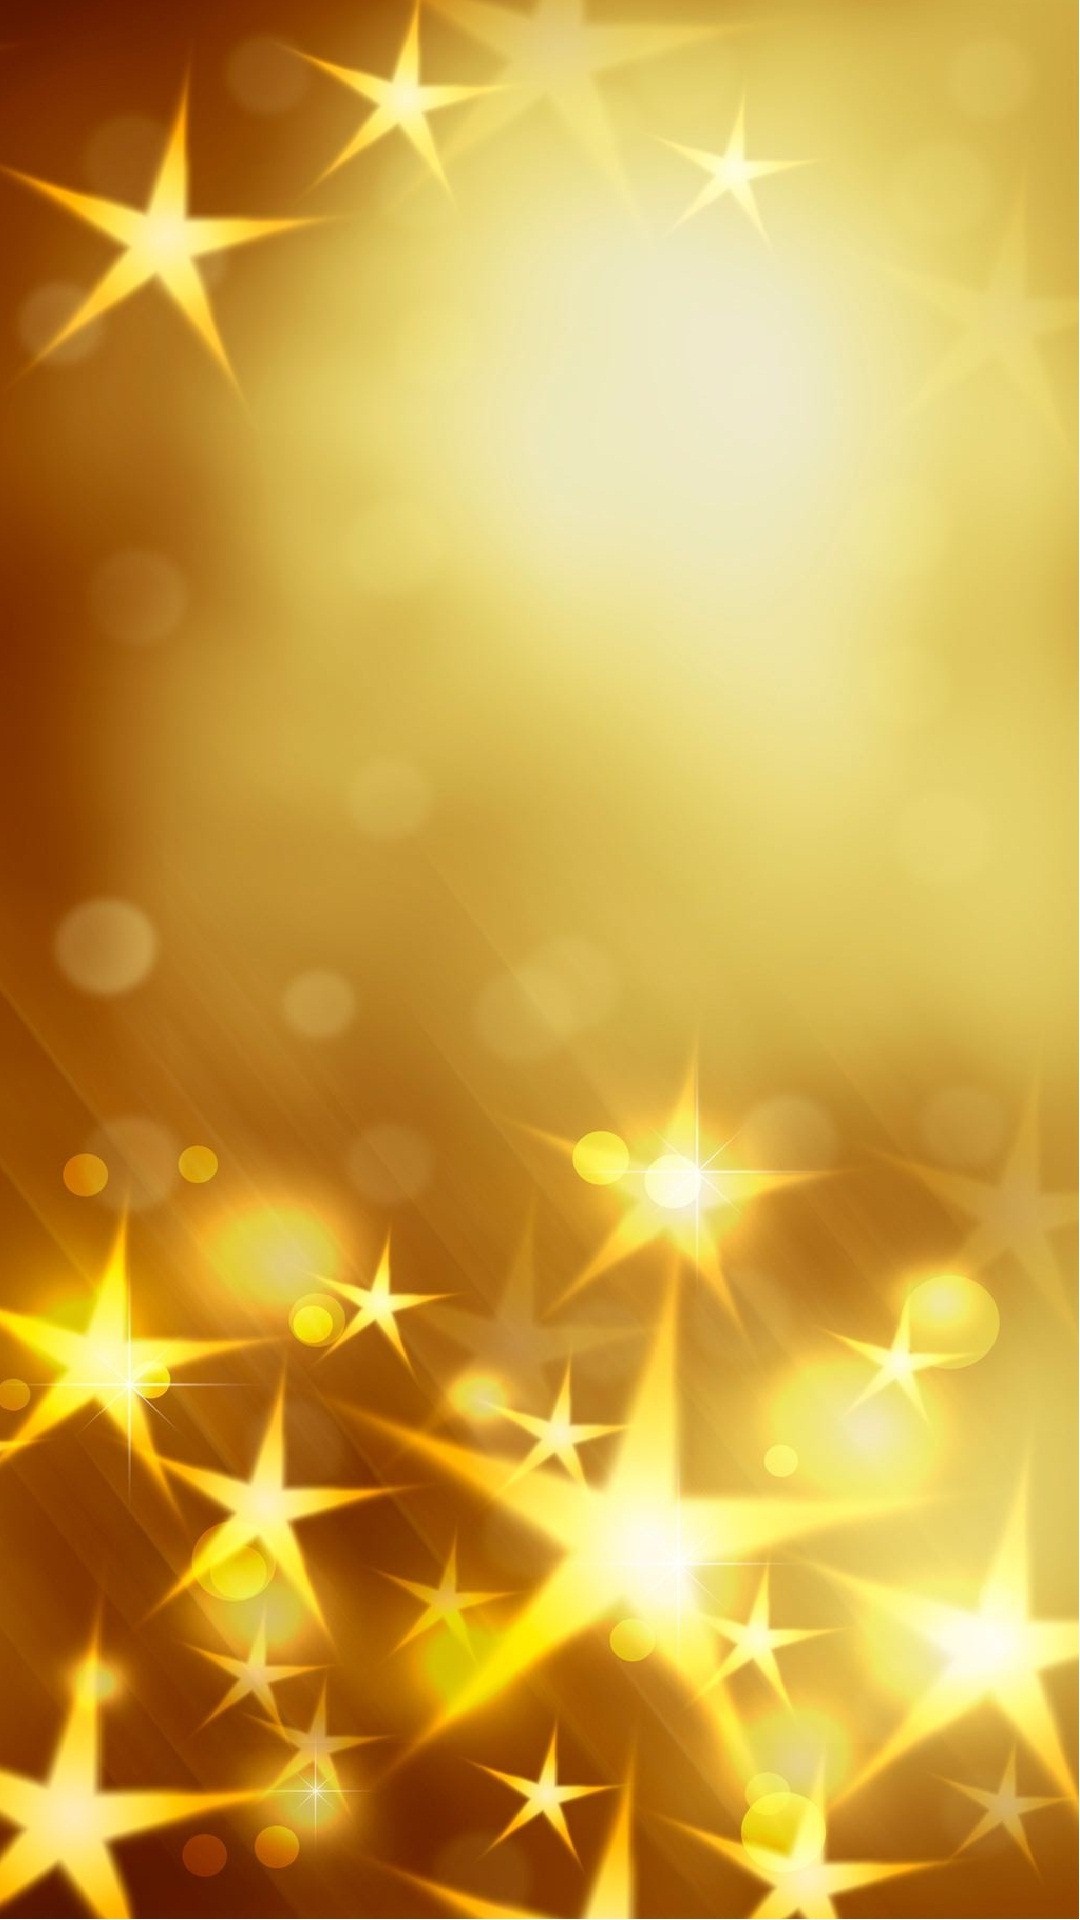 Gold Sparkle Android Wallpaper with HD resolution 1080x1920